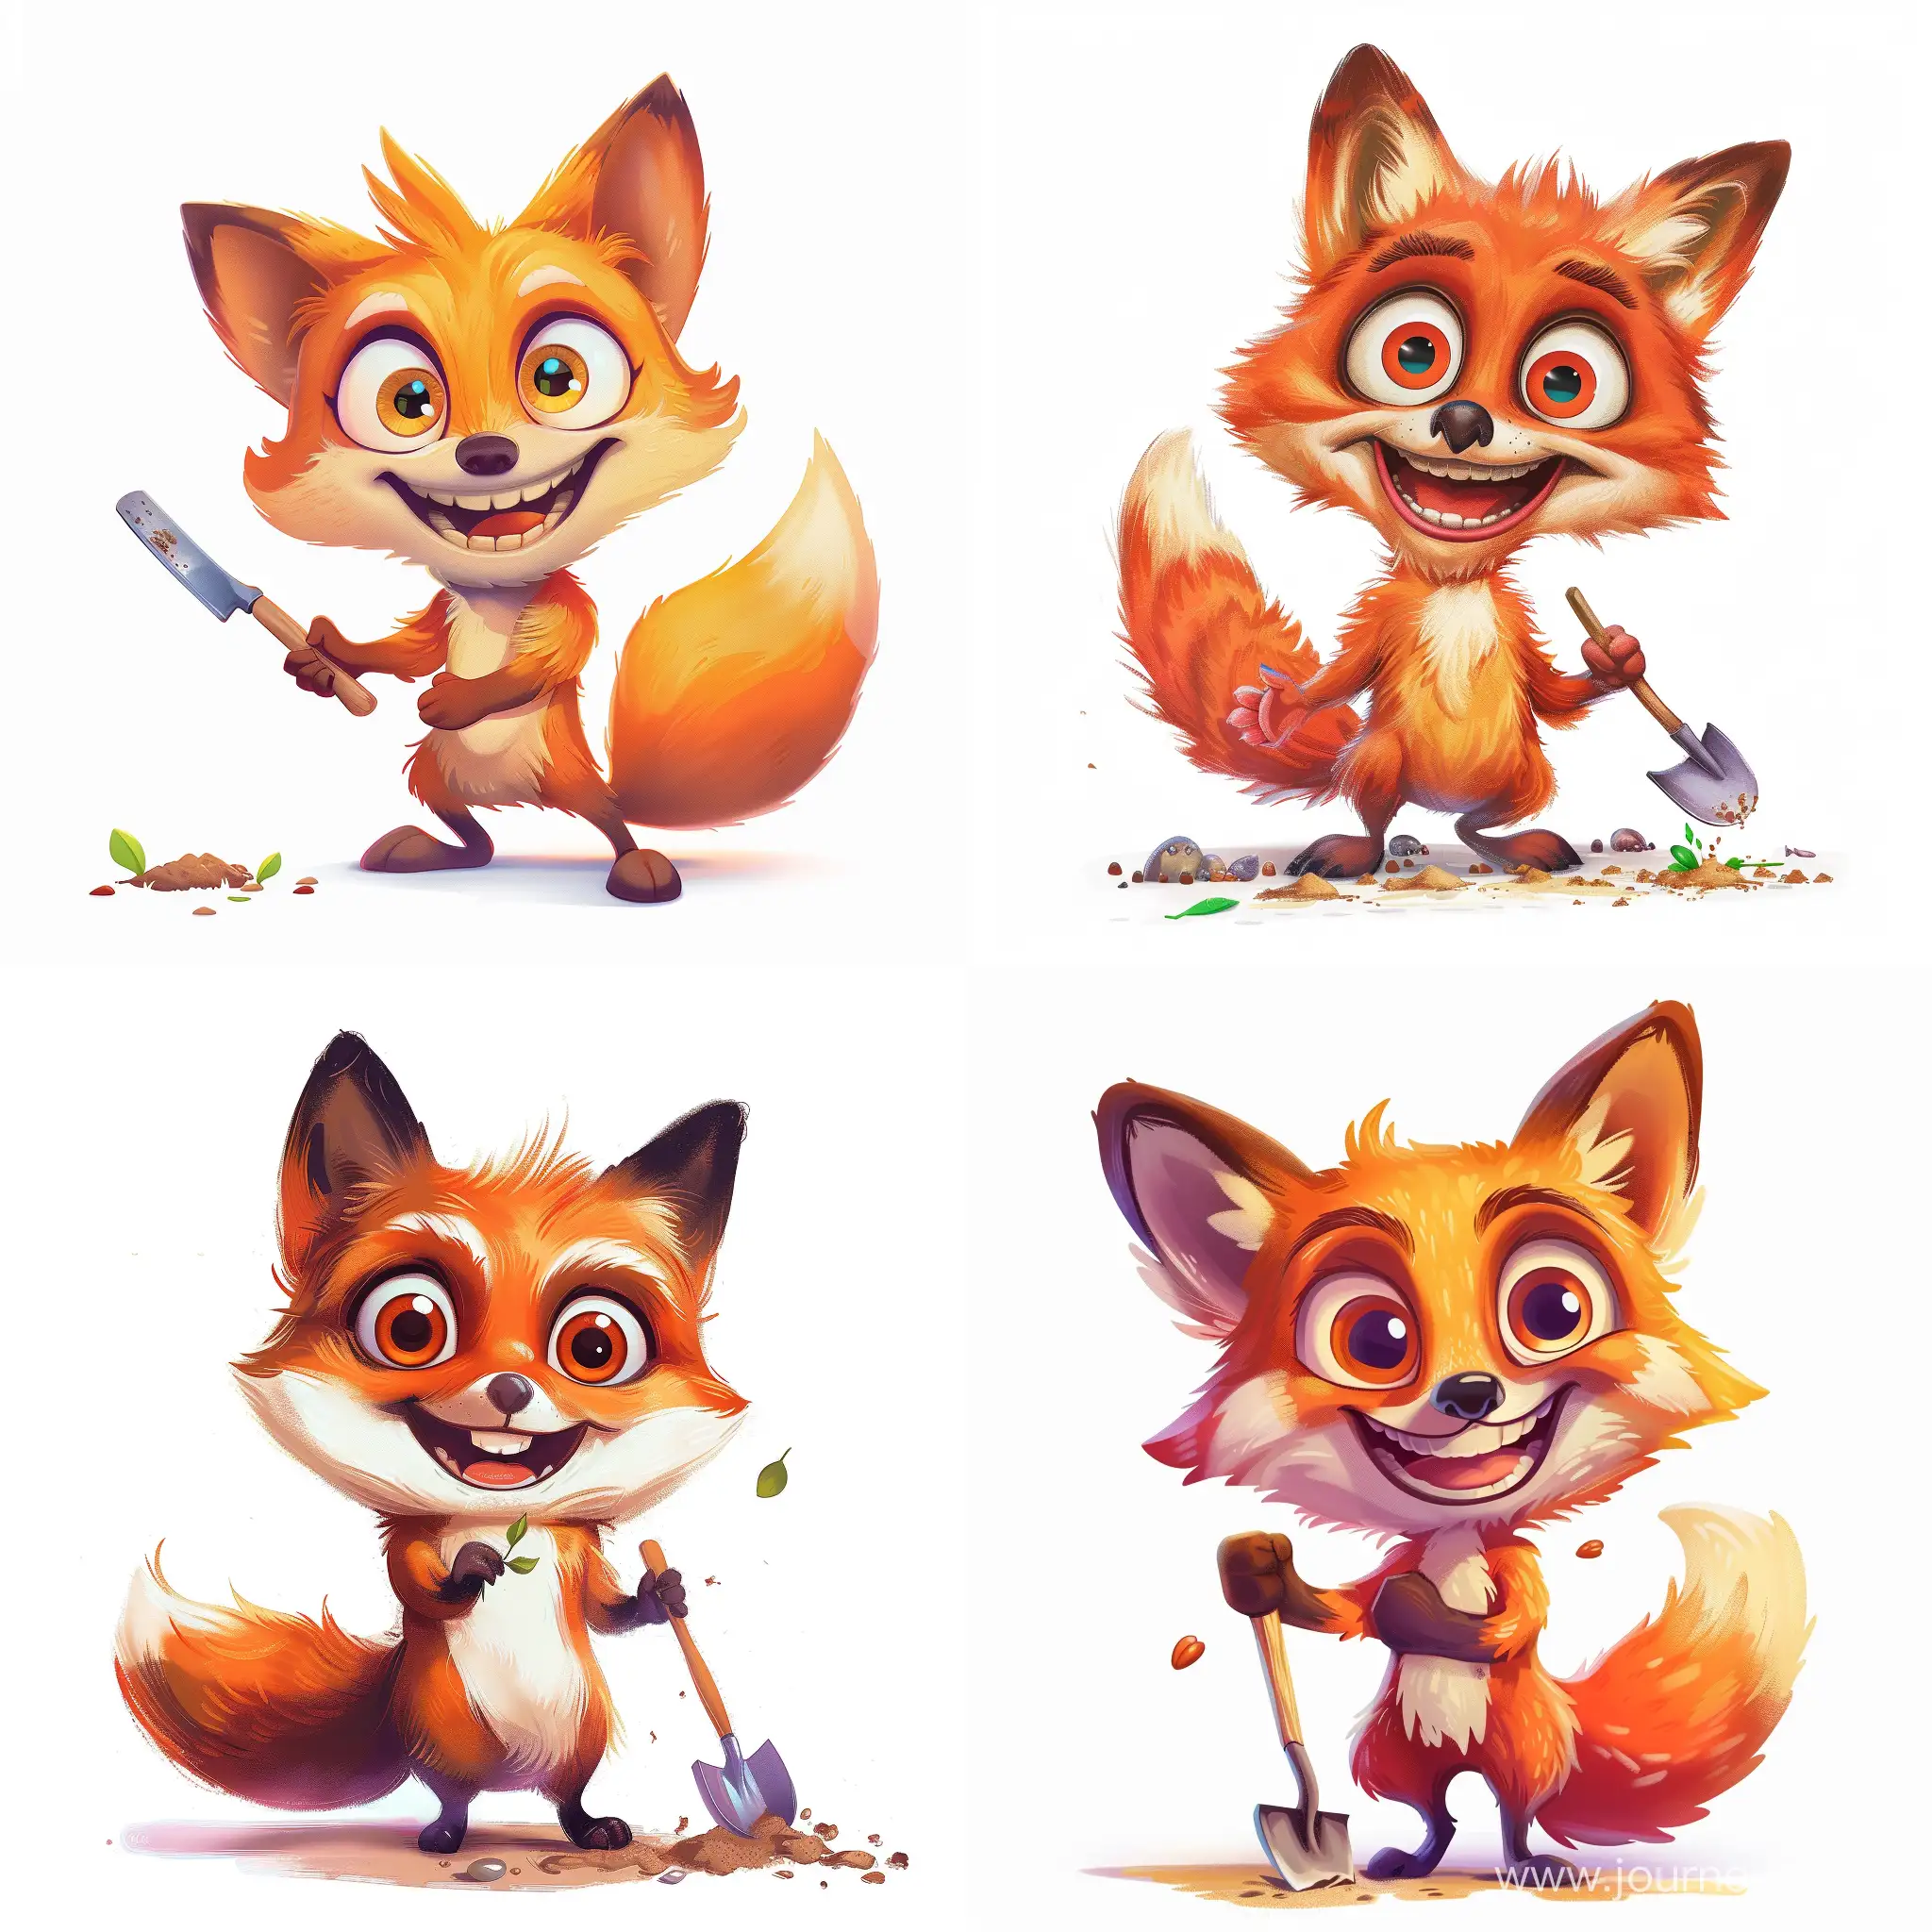 a vibrant, cartoon-style illustration for a children's book featuring a cheerful fox. Background: solid white. Character: fox with exaggerated, whimsical features, large expressive eyes, and a wide happy smile, holding a small spade, ready to dig into the earth with enthusiasm for planting seeds. The fox conveys optimism and readiness for adventure, playful energy, hinting at growth and transformation. The style is of thick, smooth lines for character outlines, subtle shading, and highlights for three-dimensionality.